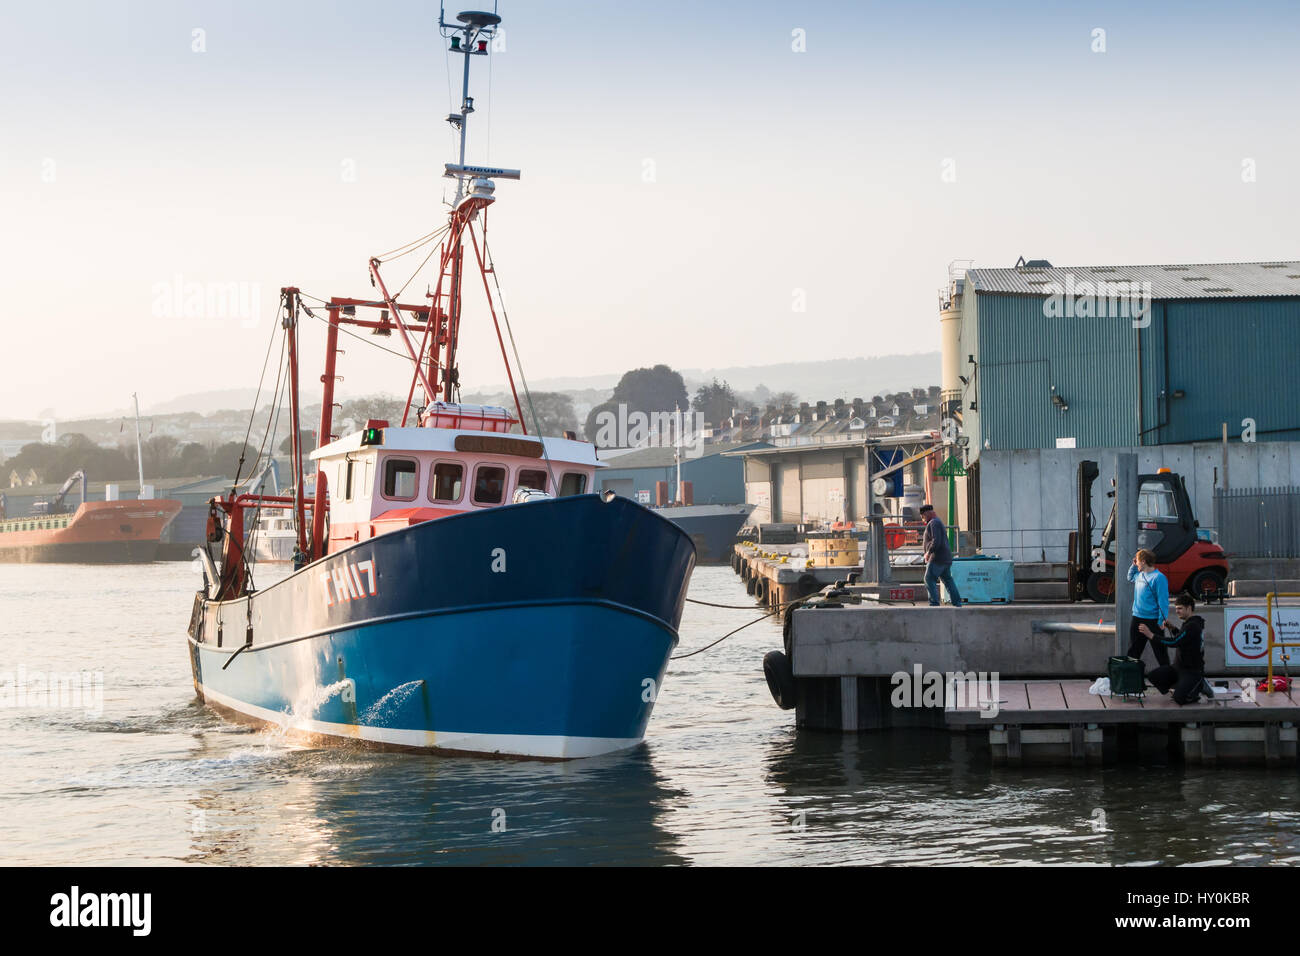 A Teignmouth trawler, docking to unload its catch of fish on the fish quay at Teignmouth, Devon, UK. Two young males are fishing on a pontoon also. Stock Photo